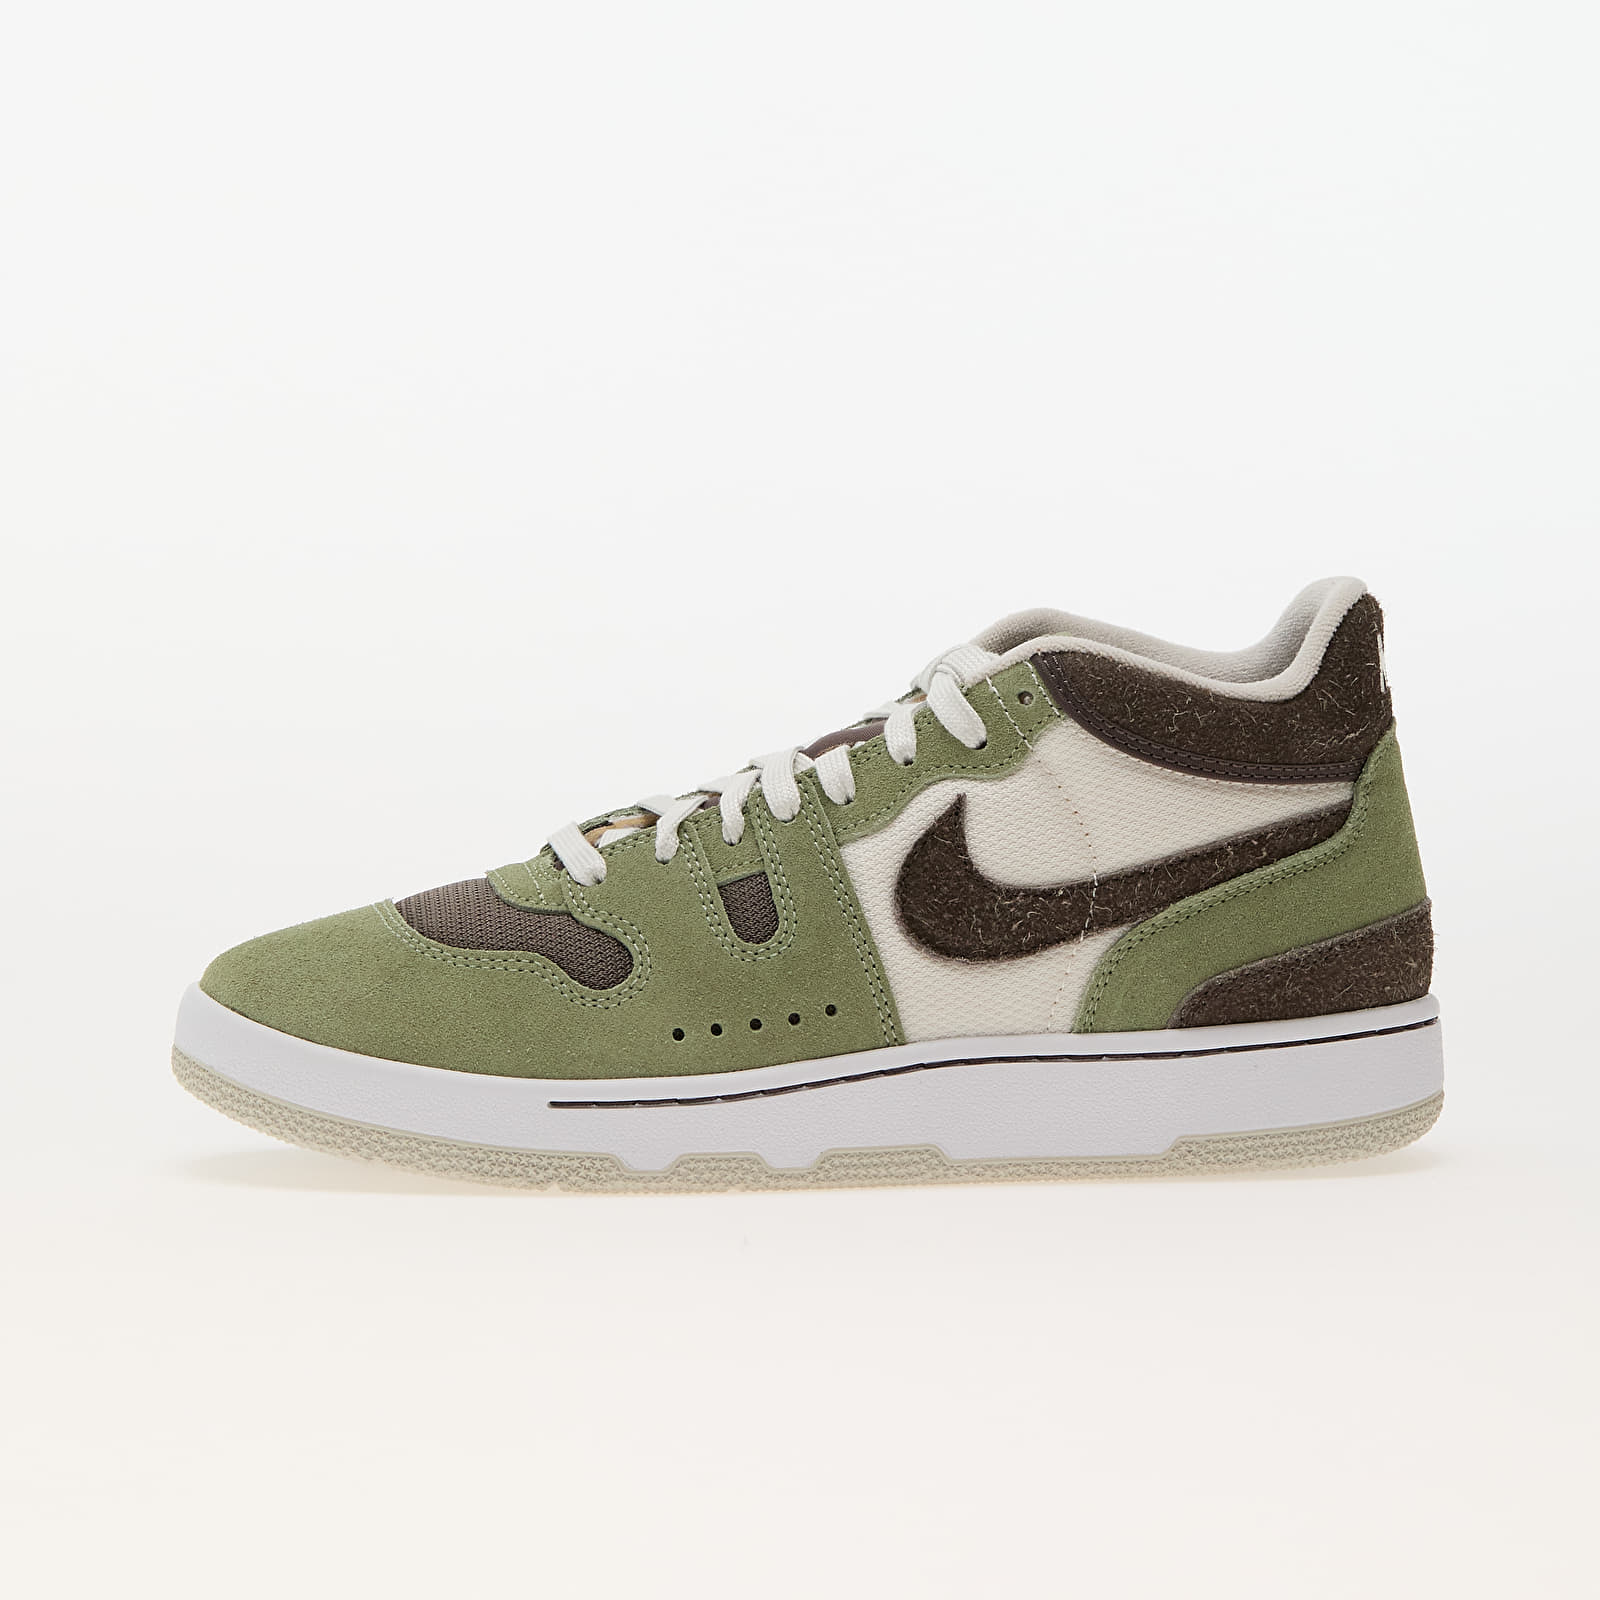 Baskets et chaussures pour hommes Nike Attack Oil Green/ Ironstone-Sail-White